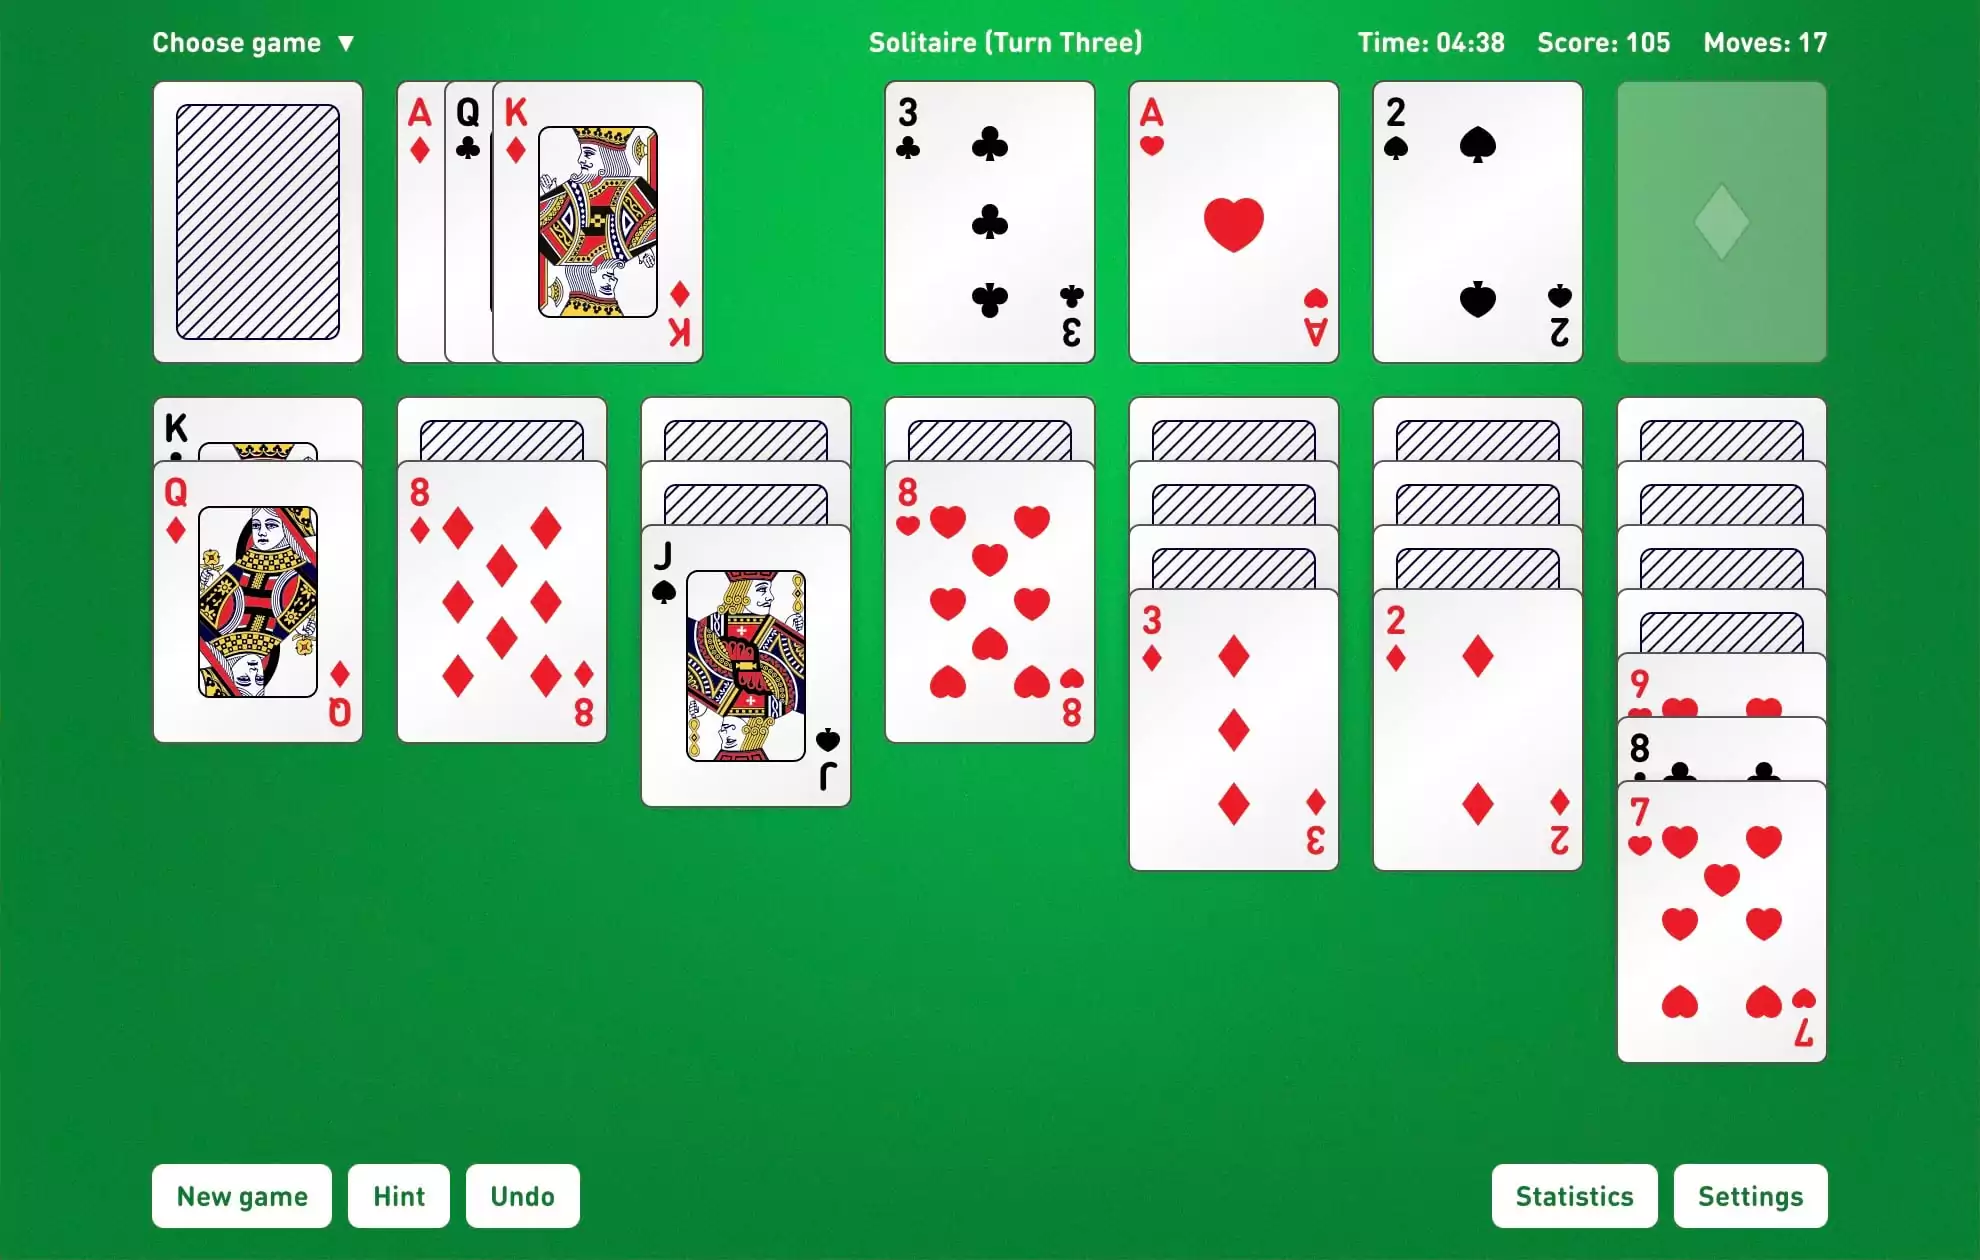 What Are the Differences Between Online Solitaire Games?